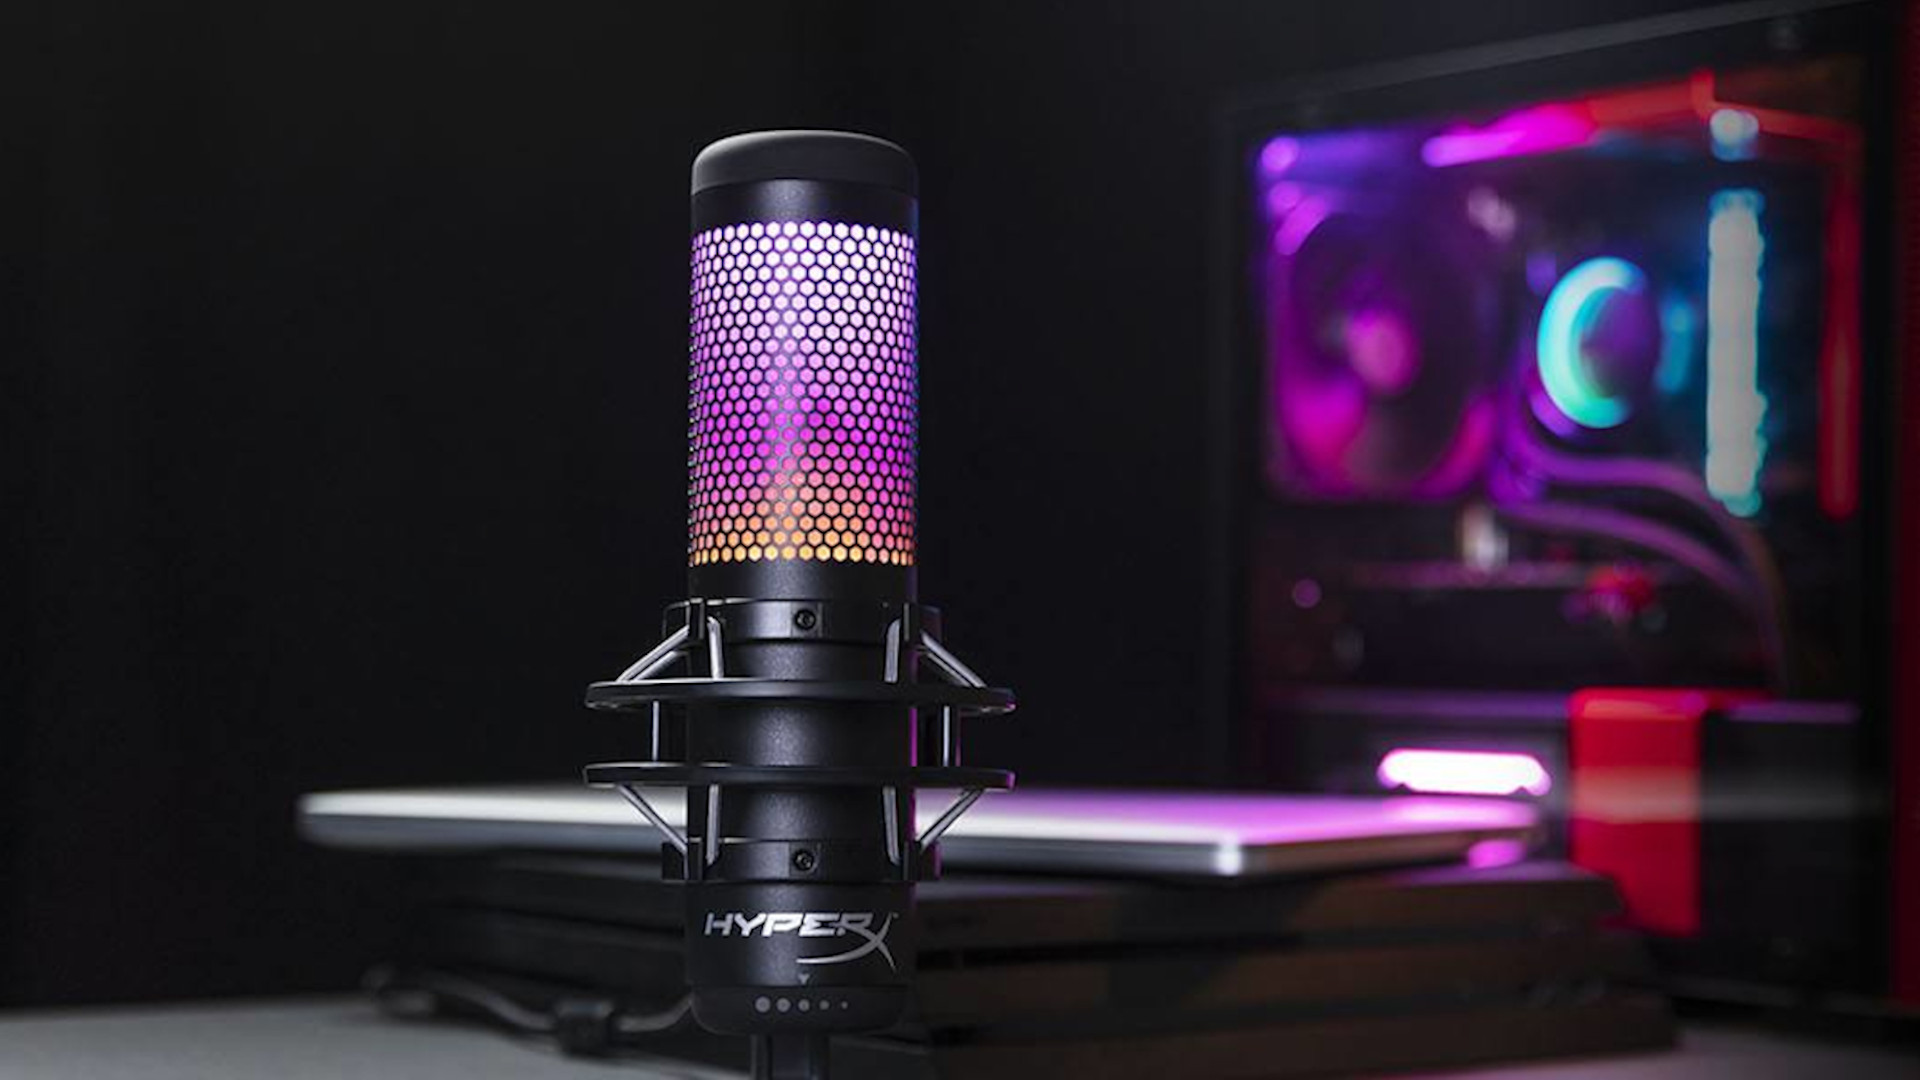 Best microphone for streaming: the HyperX Quadcast S